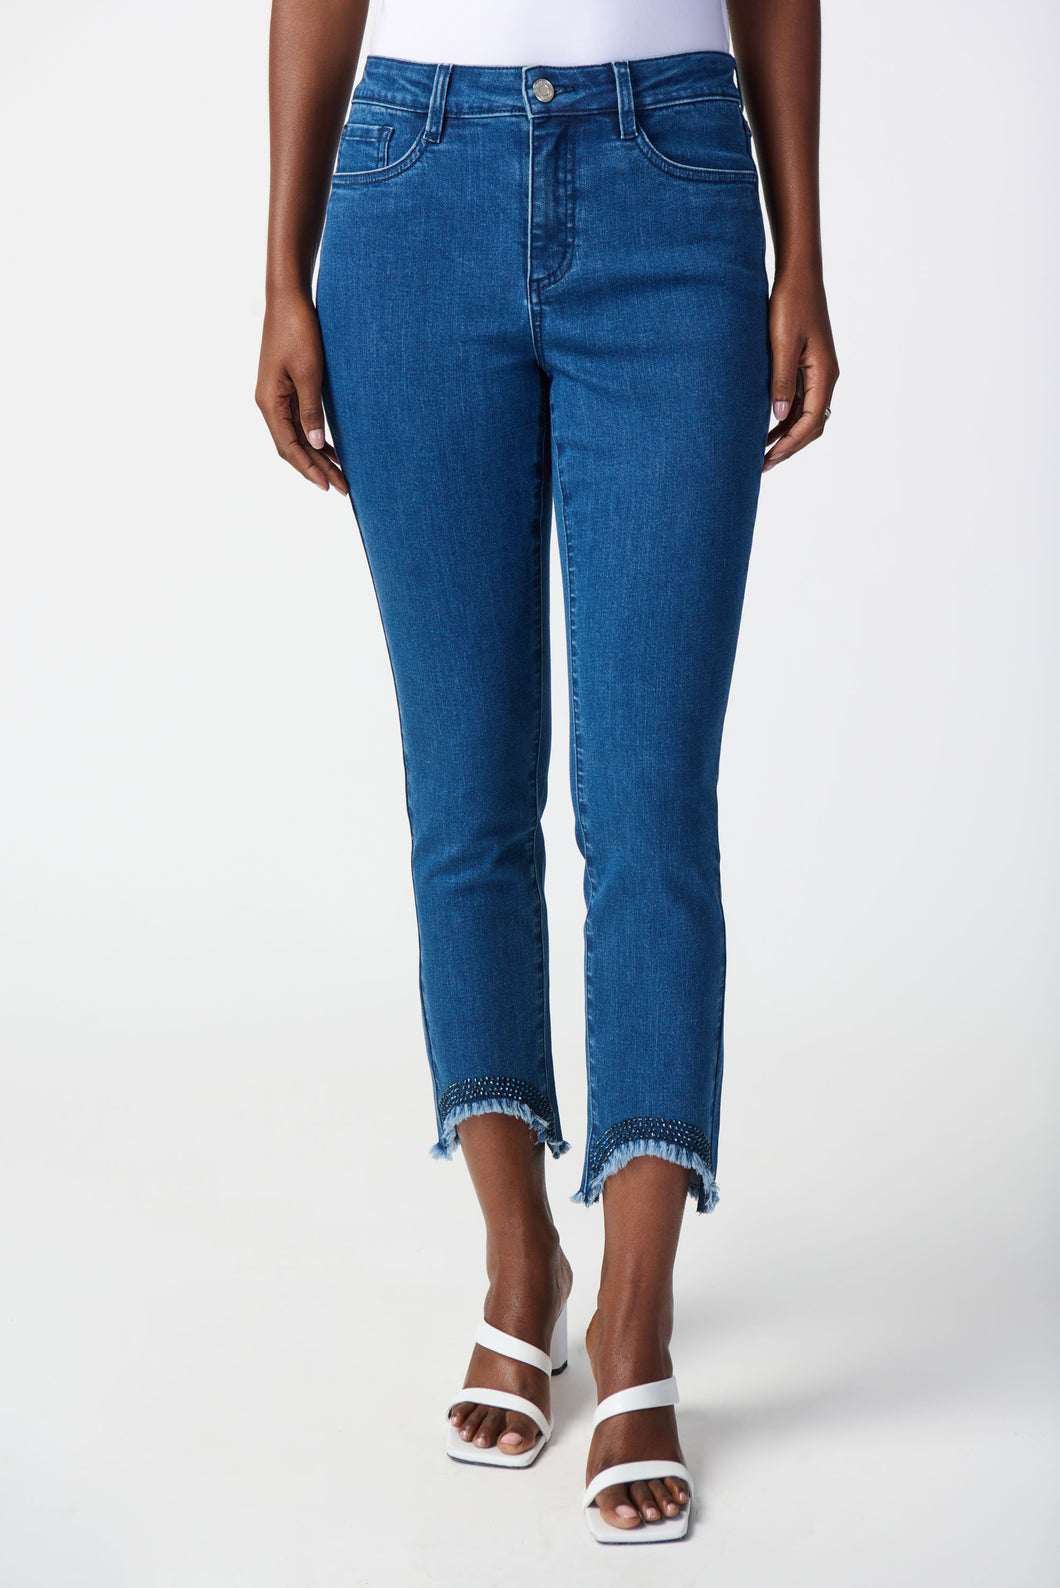 Slim Crop Jeans with Embellished Hem by Joseph Ribkoff (available in plus sizes)